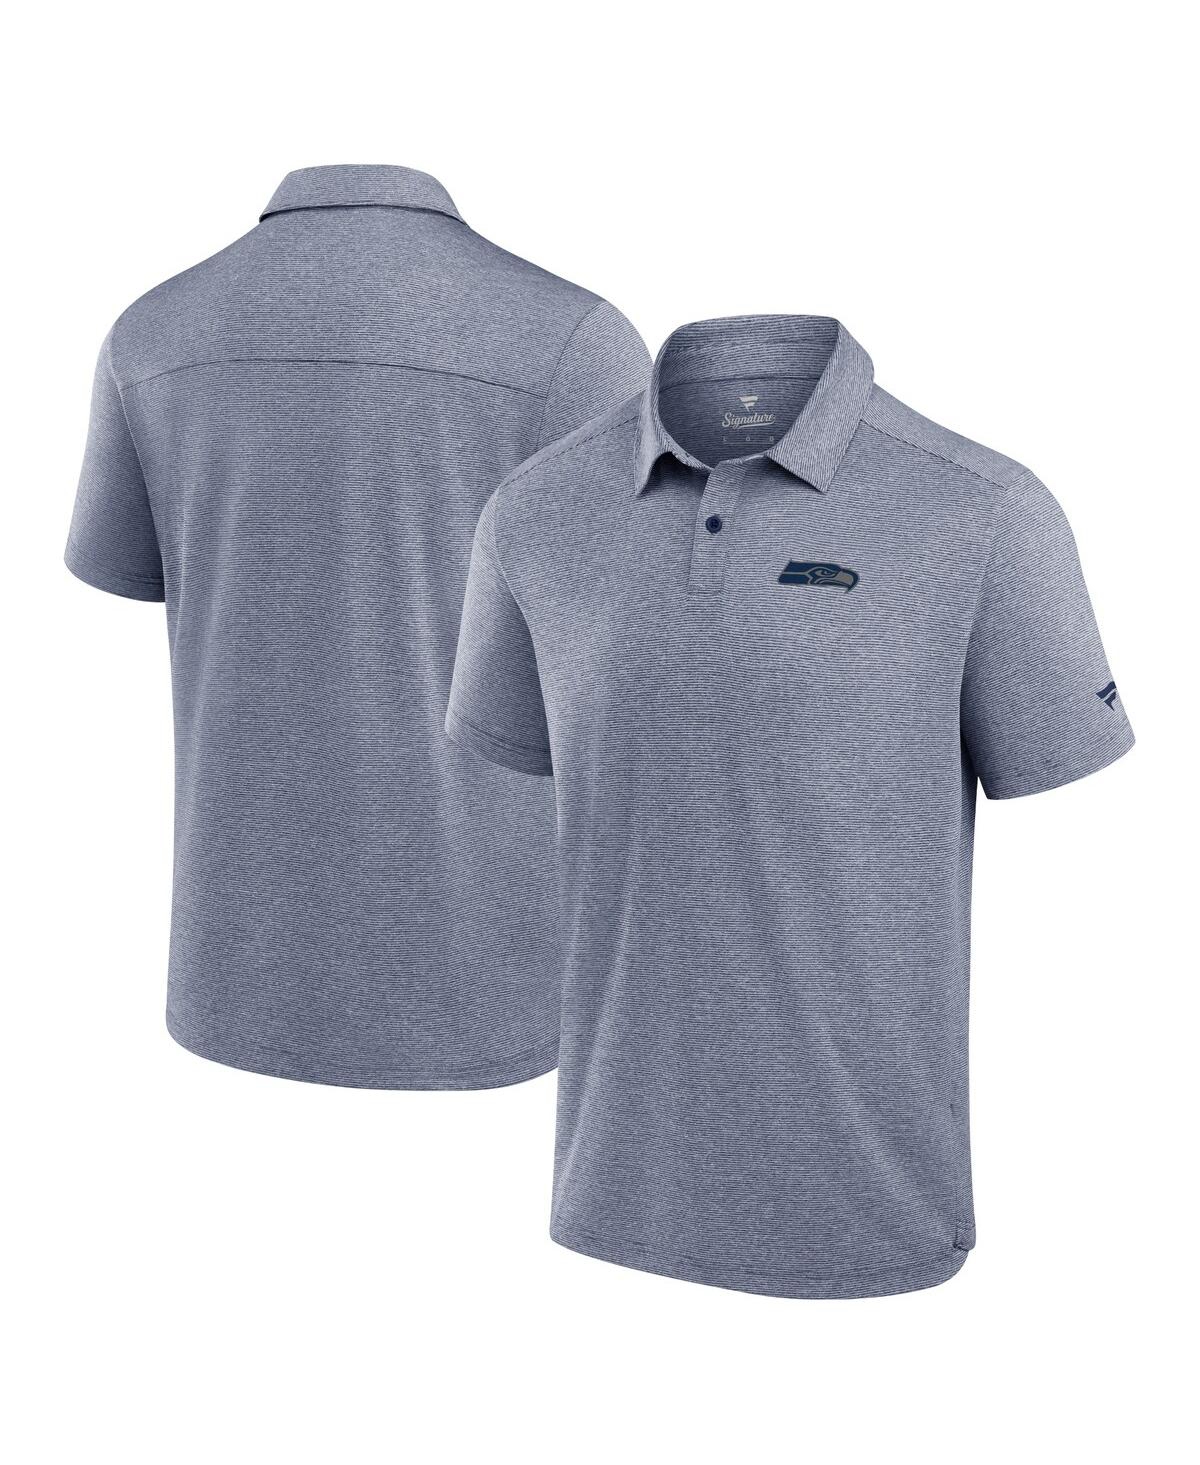 Men's Navy Seattle Seahawks Front Office Tech Polo Shirt - Ath Navy